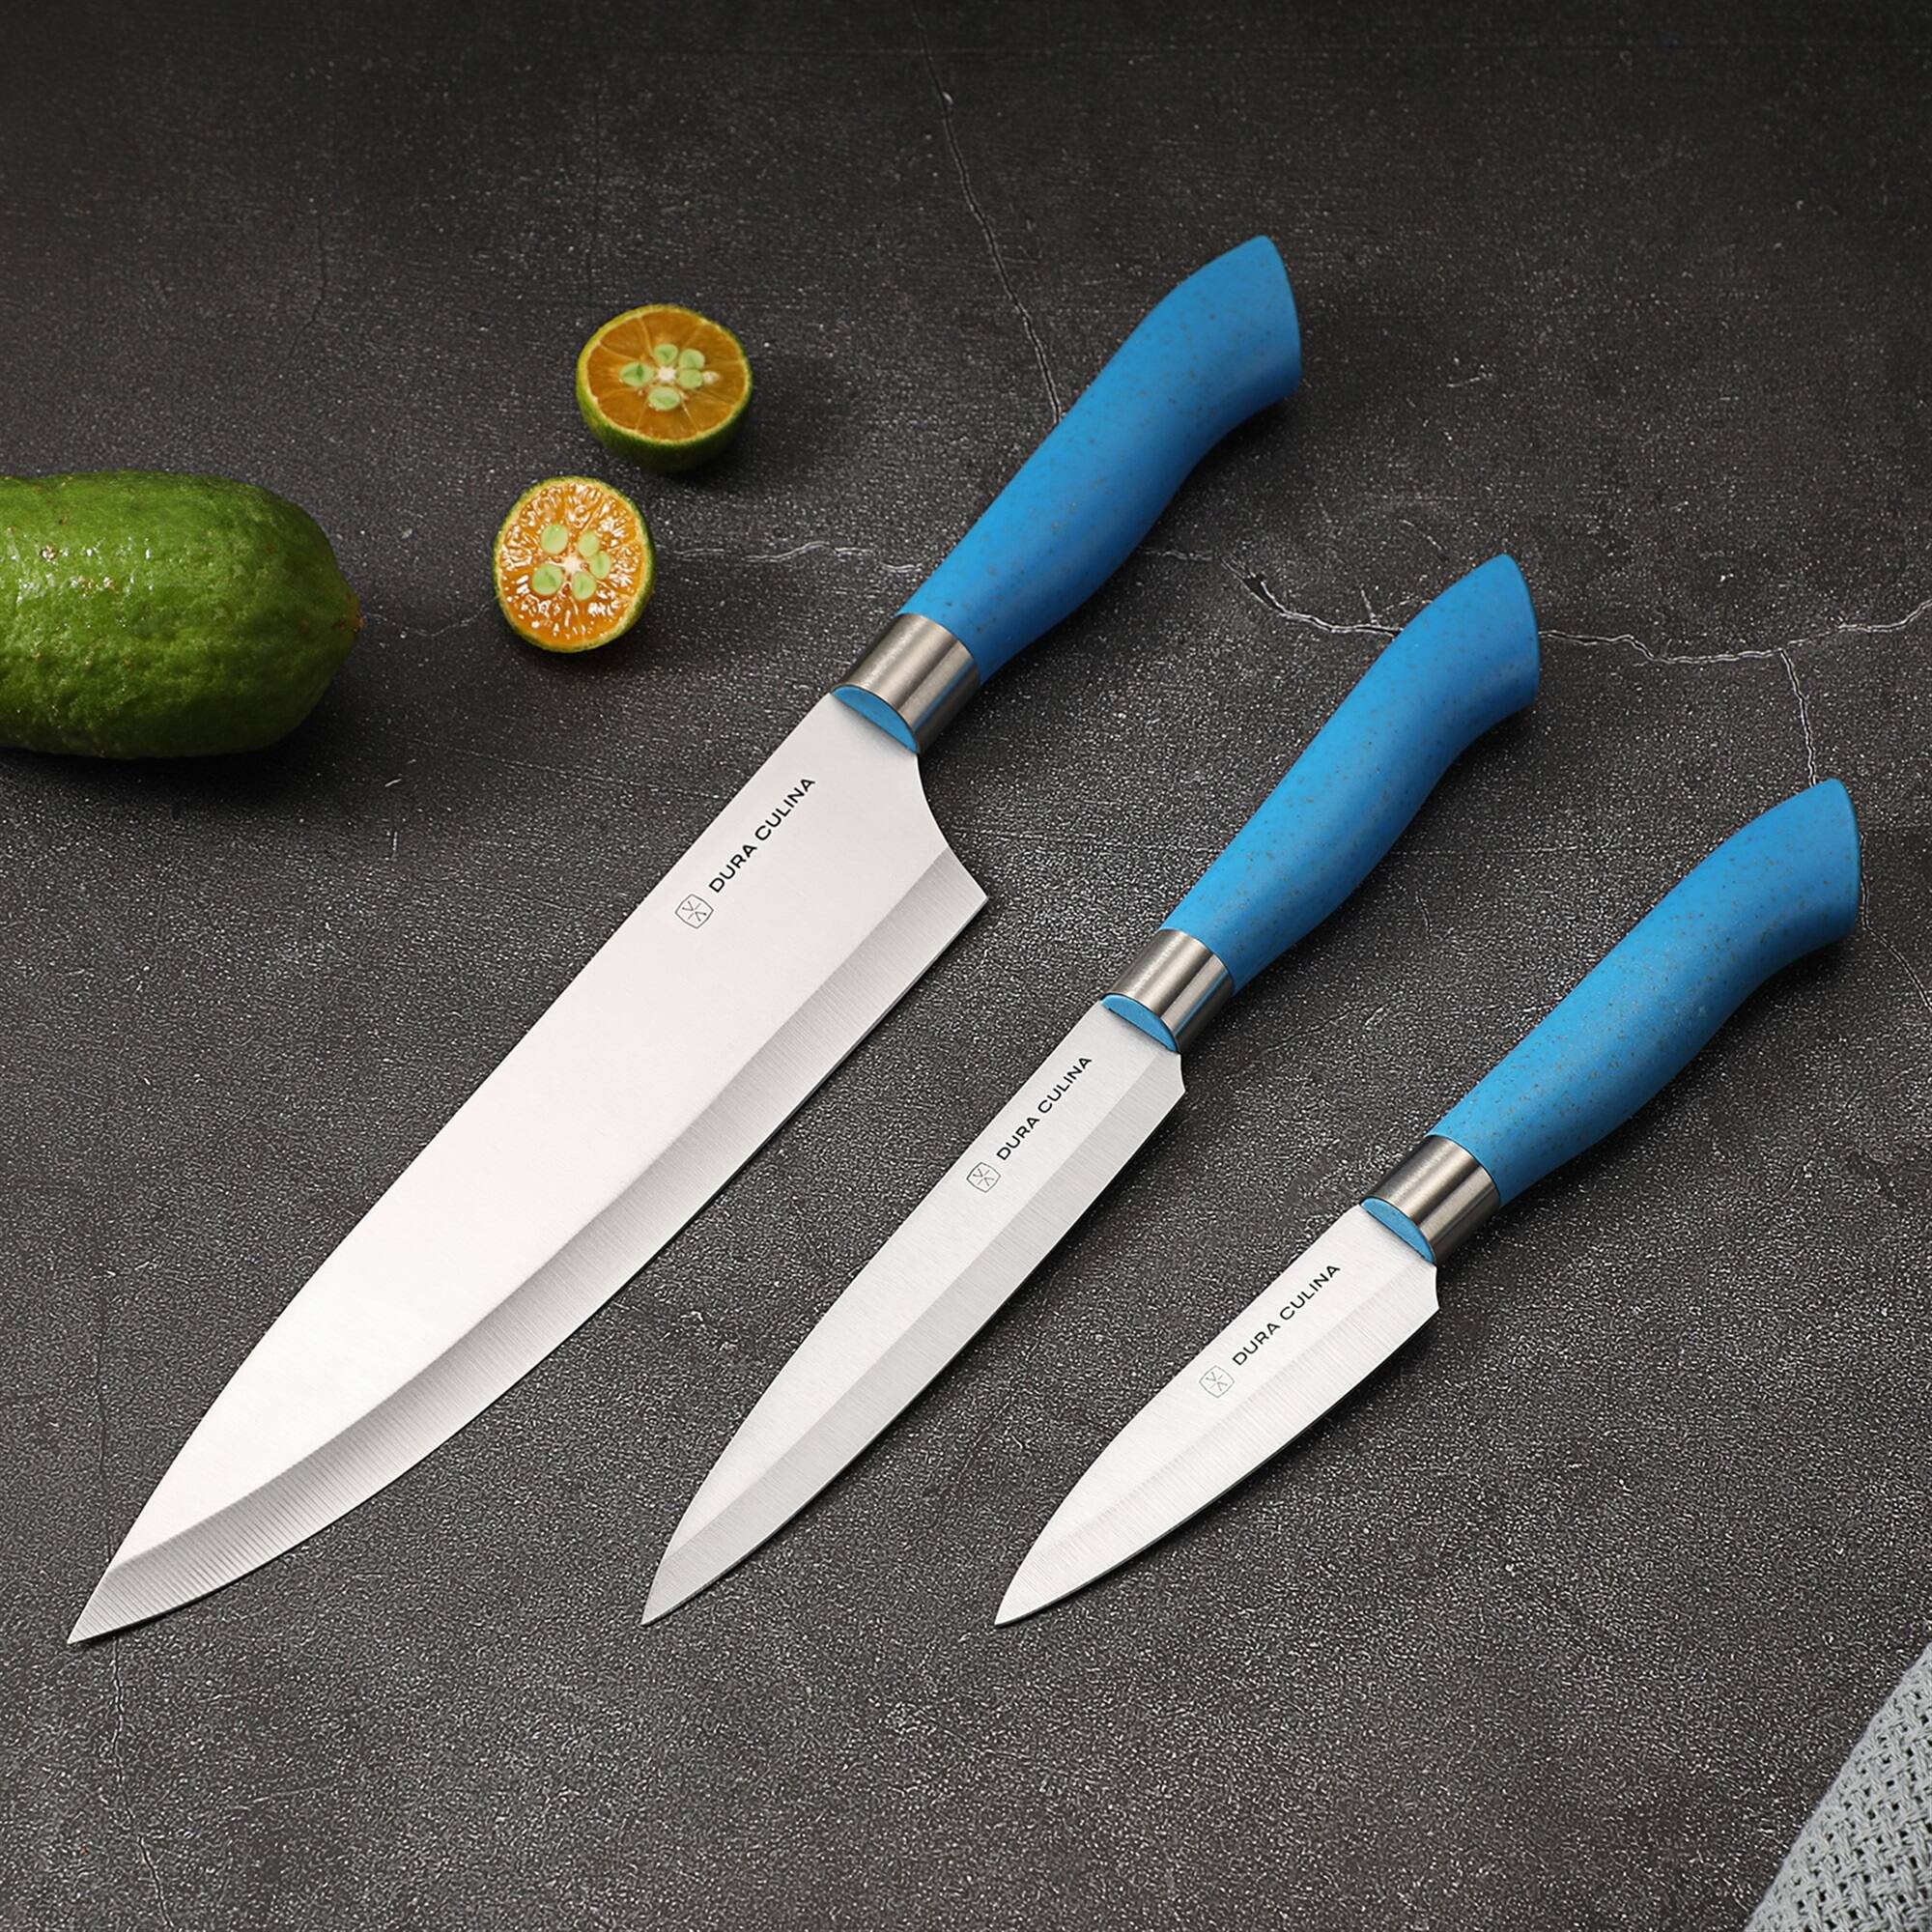 DURA LIVING EcoCut 3-Piece Kitchen Knife Set - High Carbon Stainless Steel Blades, Sustainable Eco-Friendly Handles, W/ Sheaths